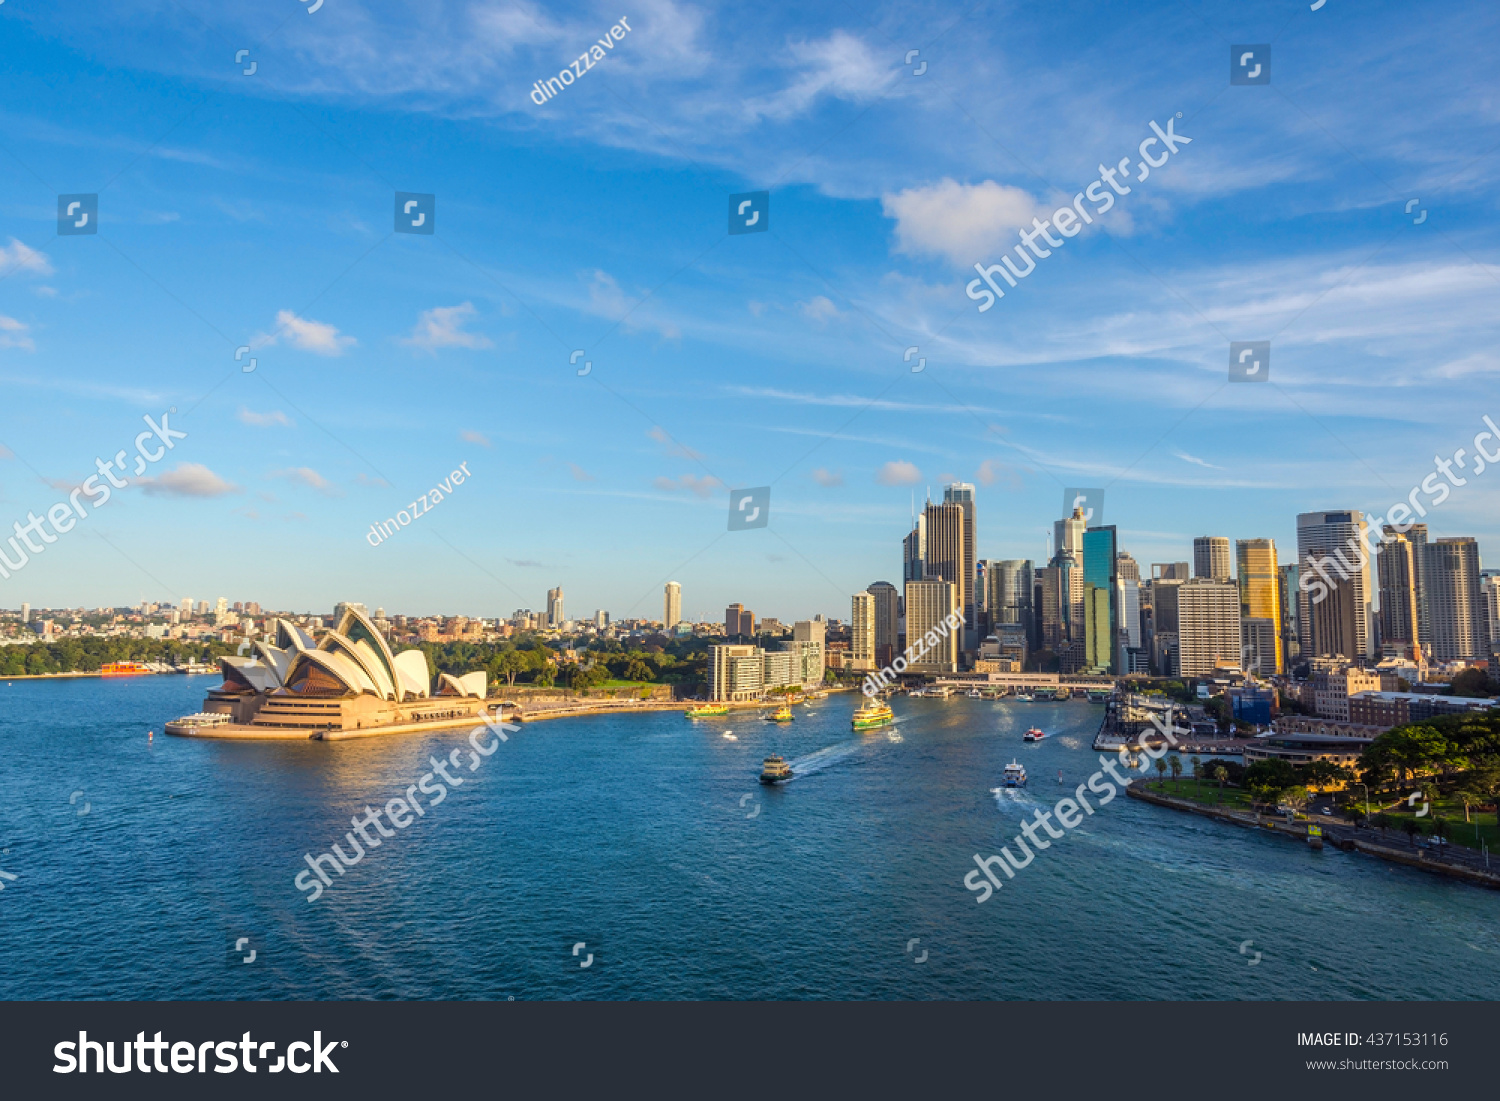 SYDNEY, AUSTRALIA - APRIL 20: Sydney downtown with opera house and circular quay district. April 2016 #437153116